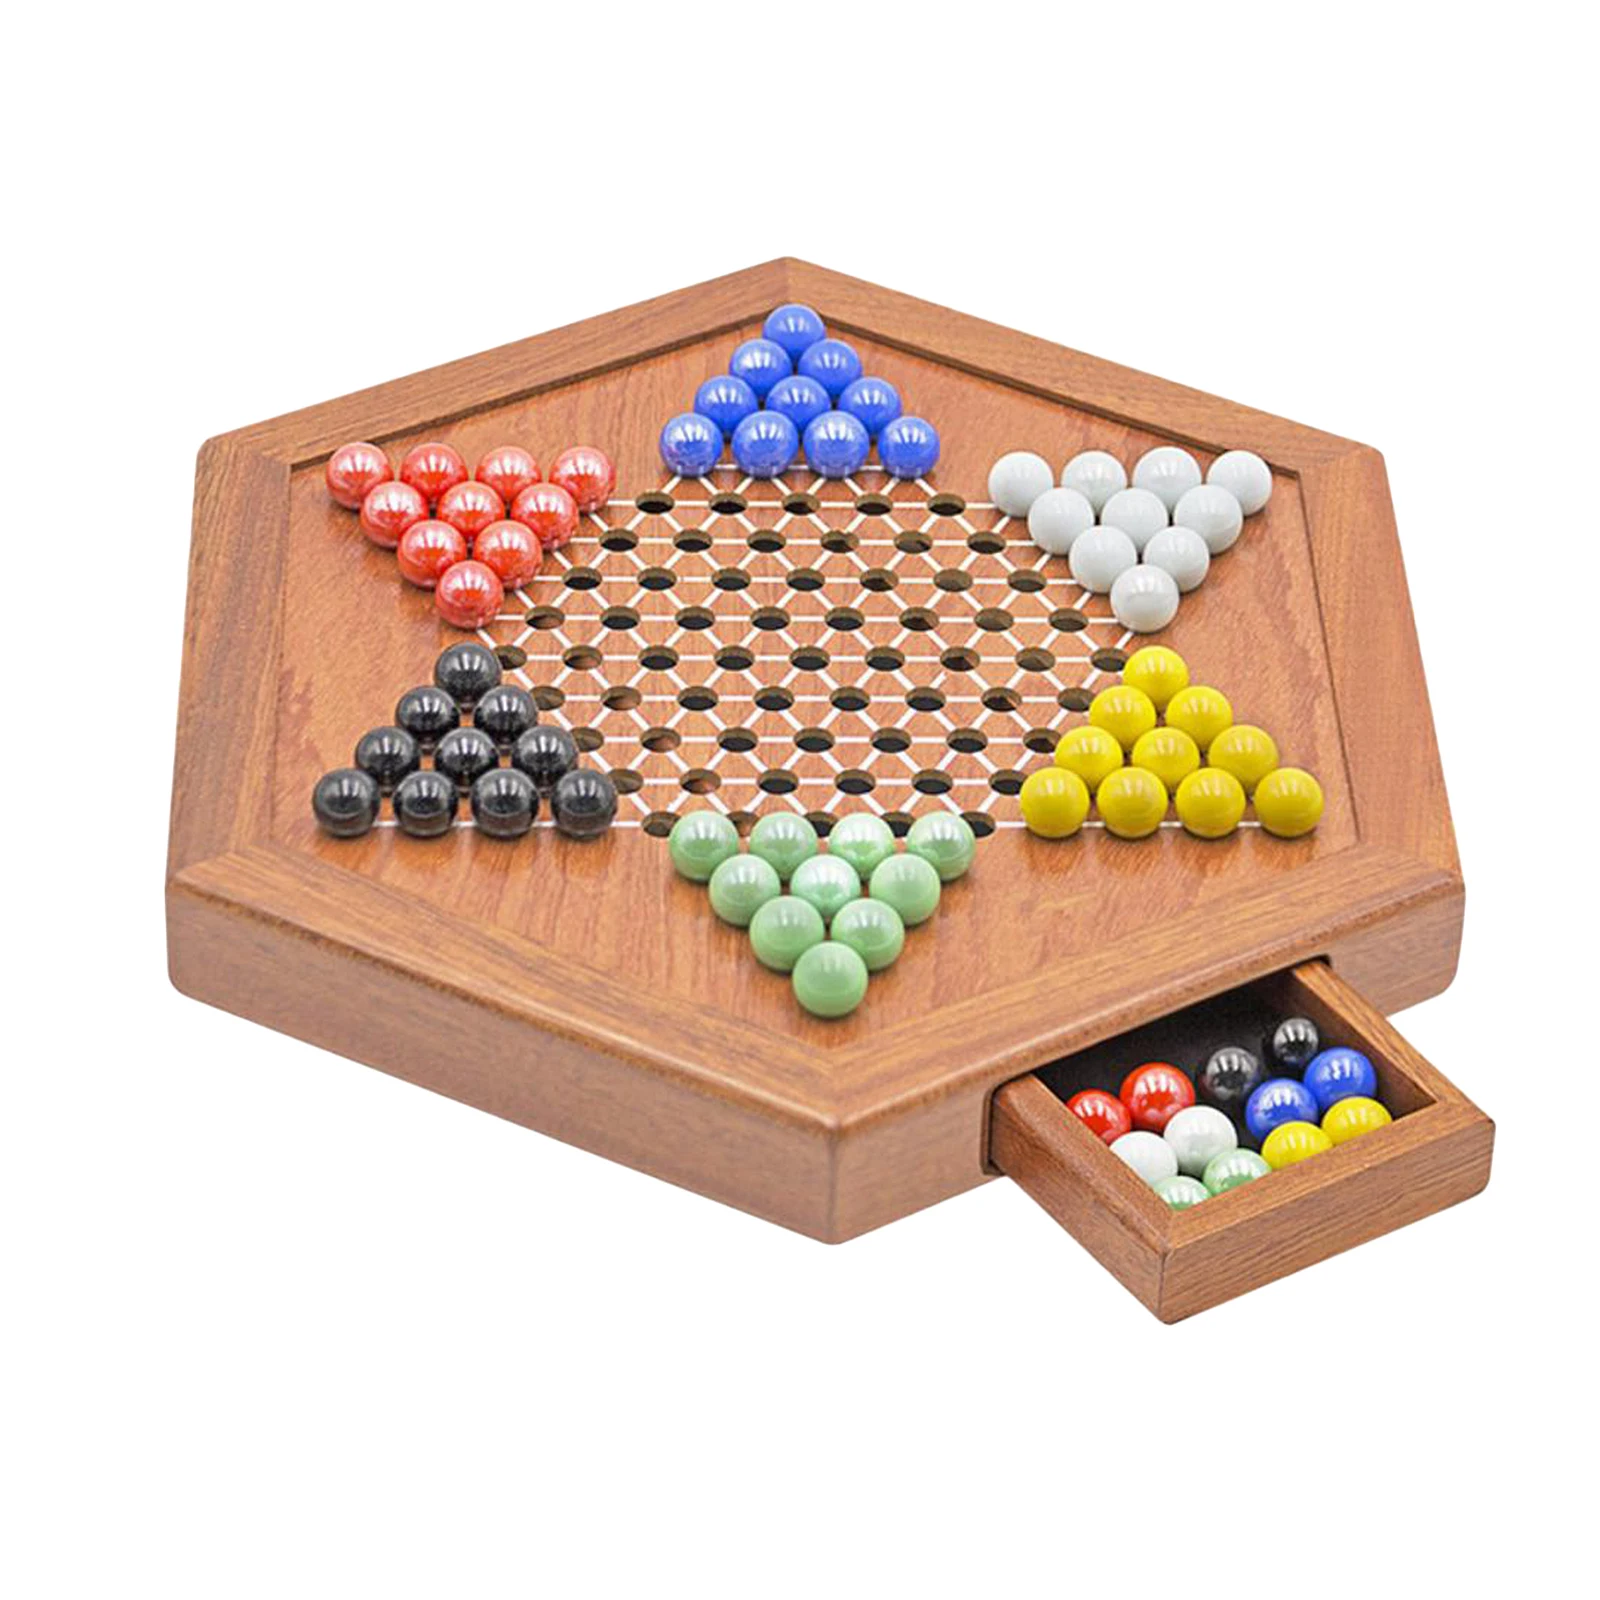 Classic Wooden Chinese Checkers 12 Inches with Drawers Halma Board Game Fine